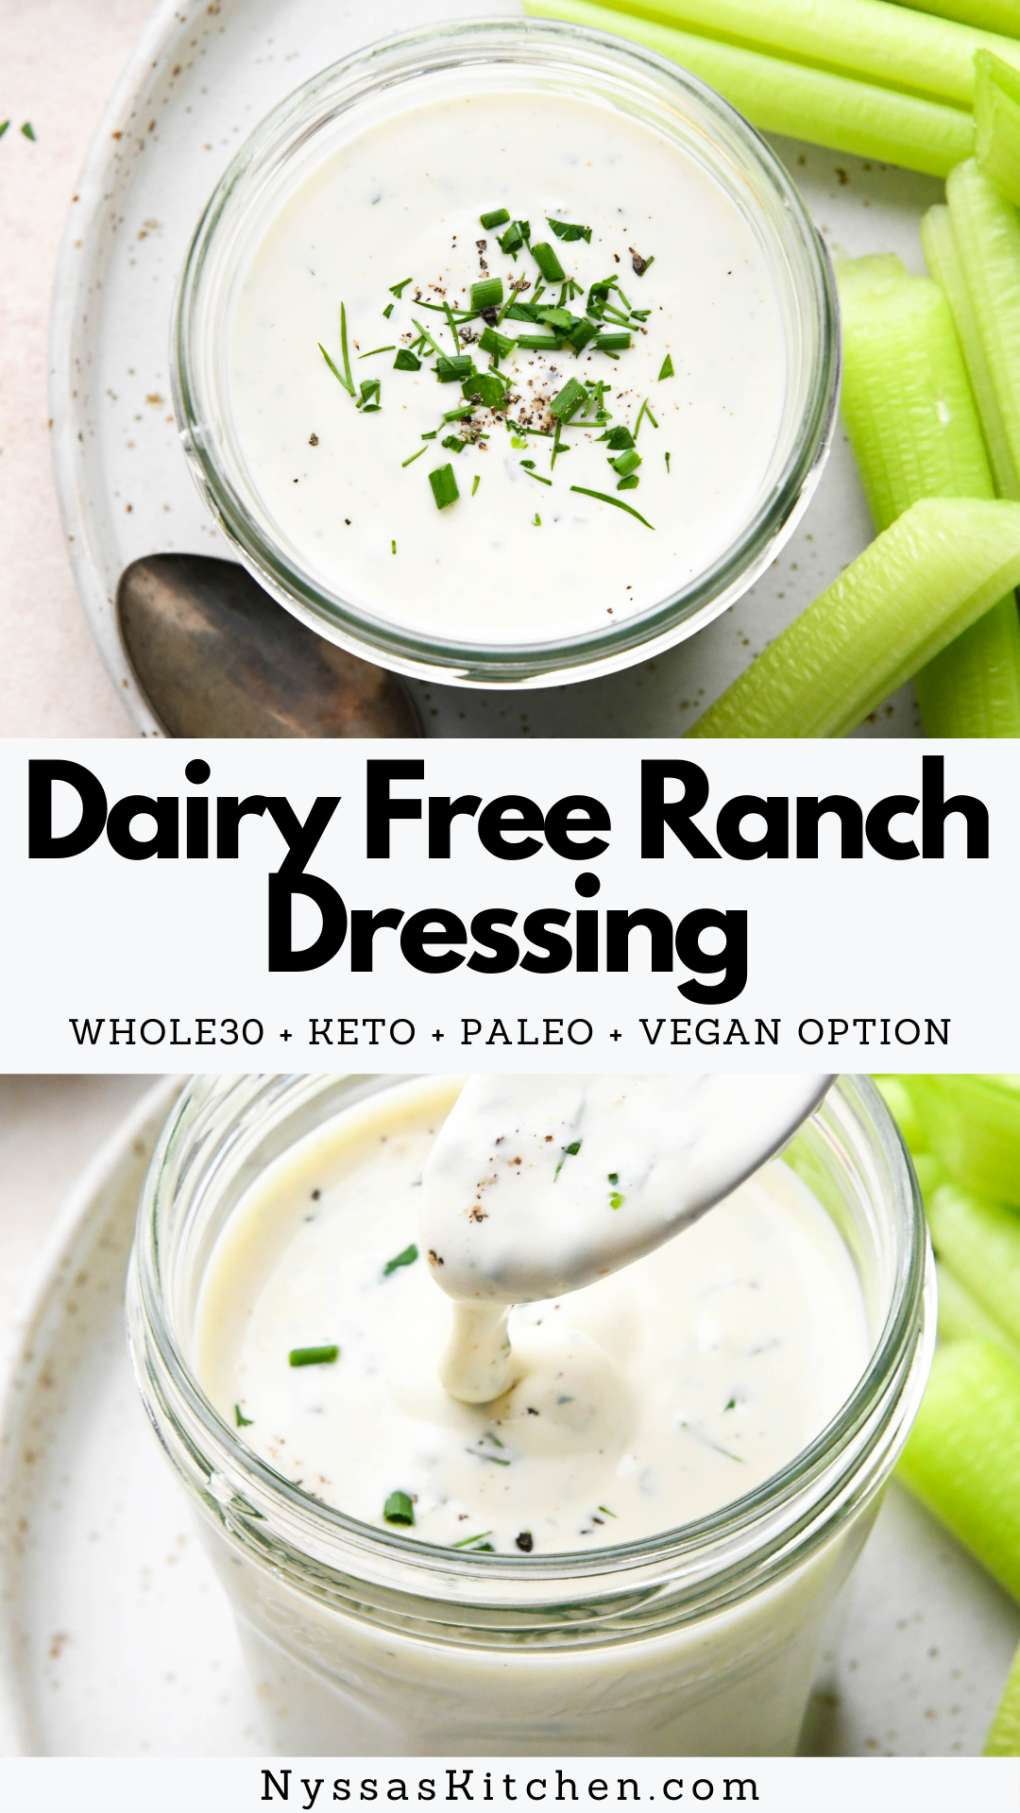 Pinterest Pin for Dairy Free Ranch Dressing